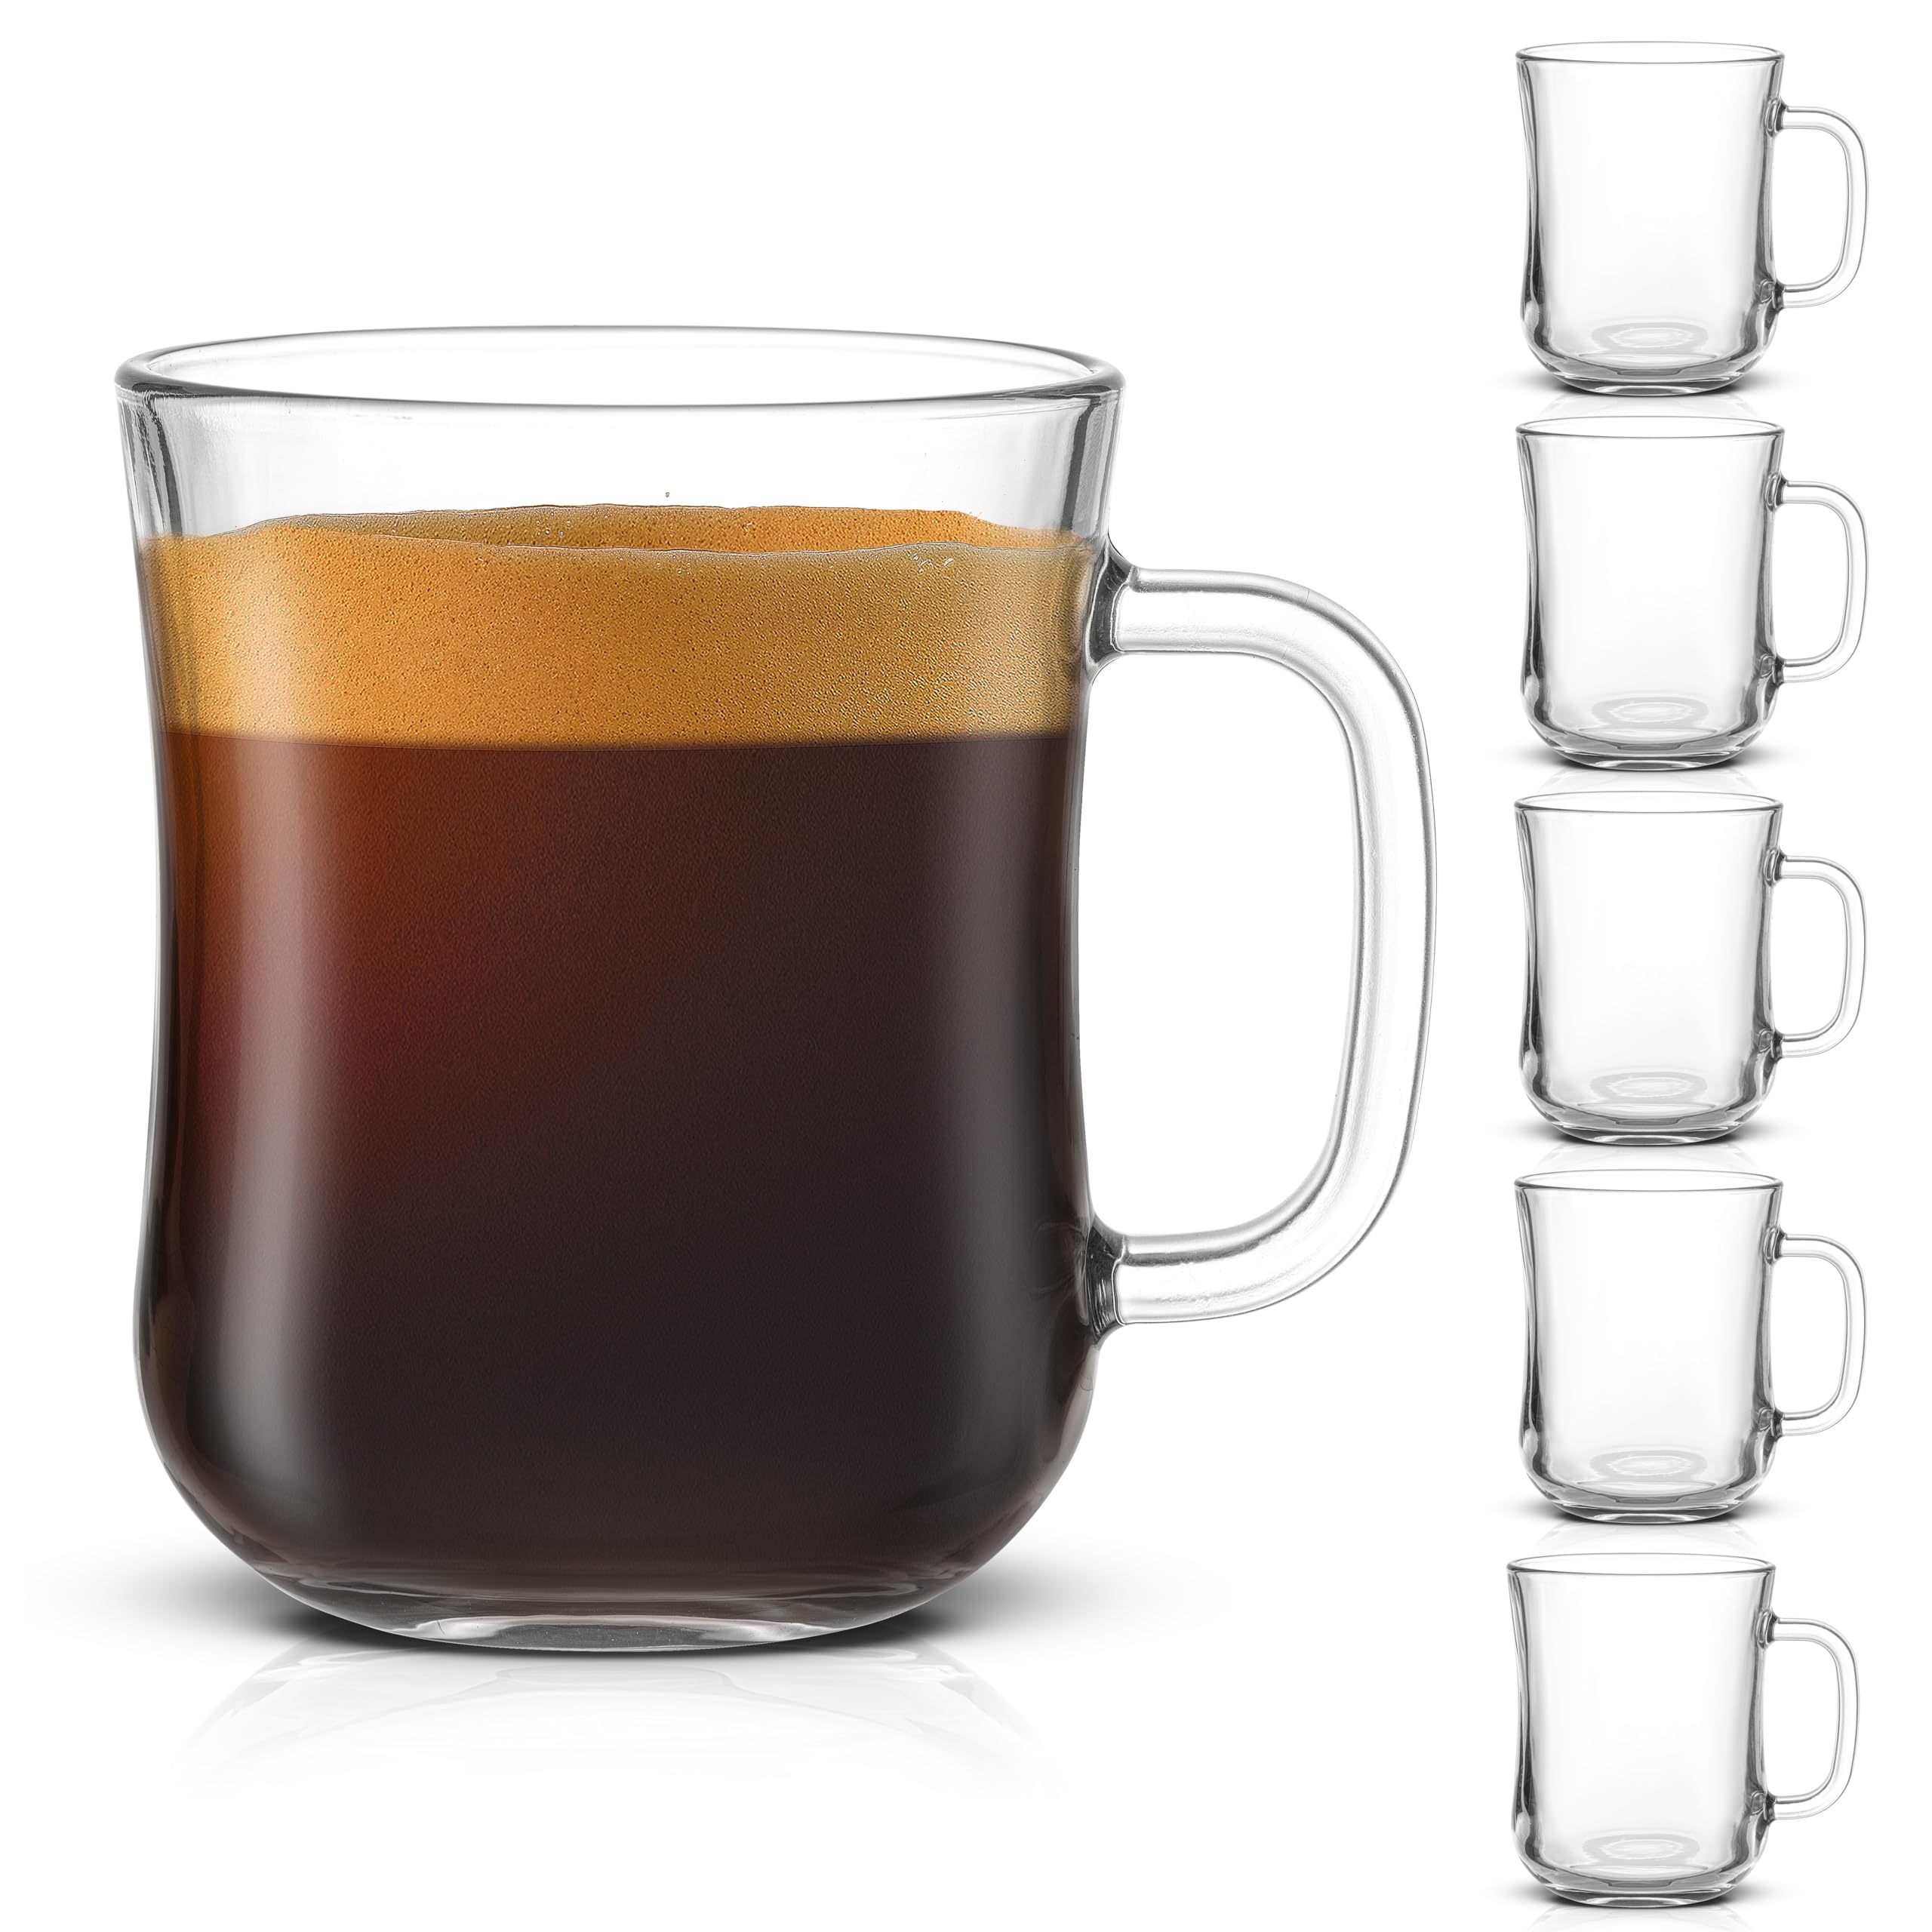 15.5-Oz JoyJolt Heavy Clear Glass Diner Coffee Mugs: Set of 6 $19.95, Set of 4 $15.95 + Free Shipping w/ Prime or on $35+